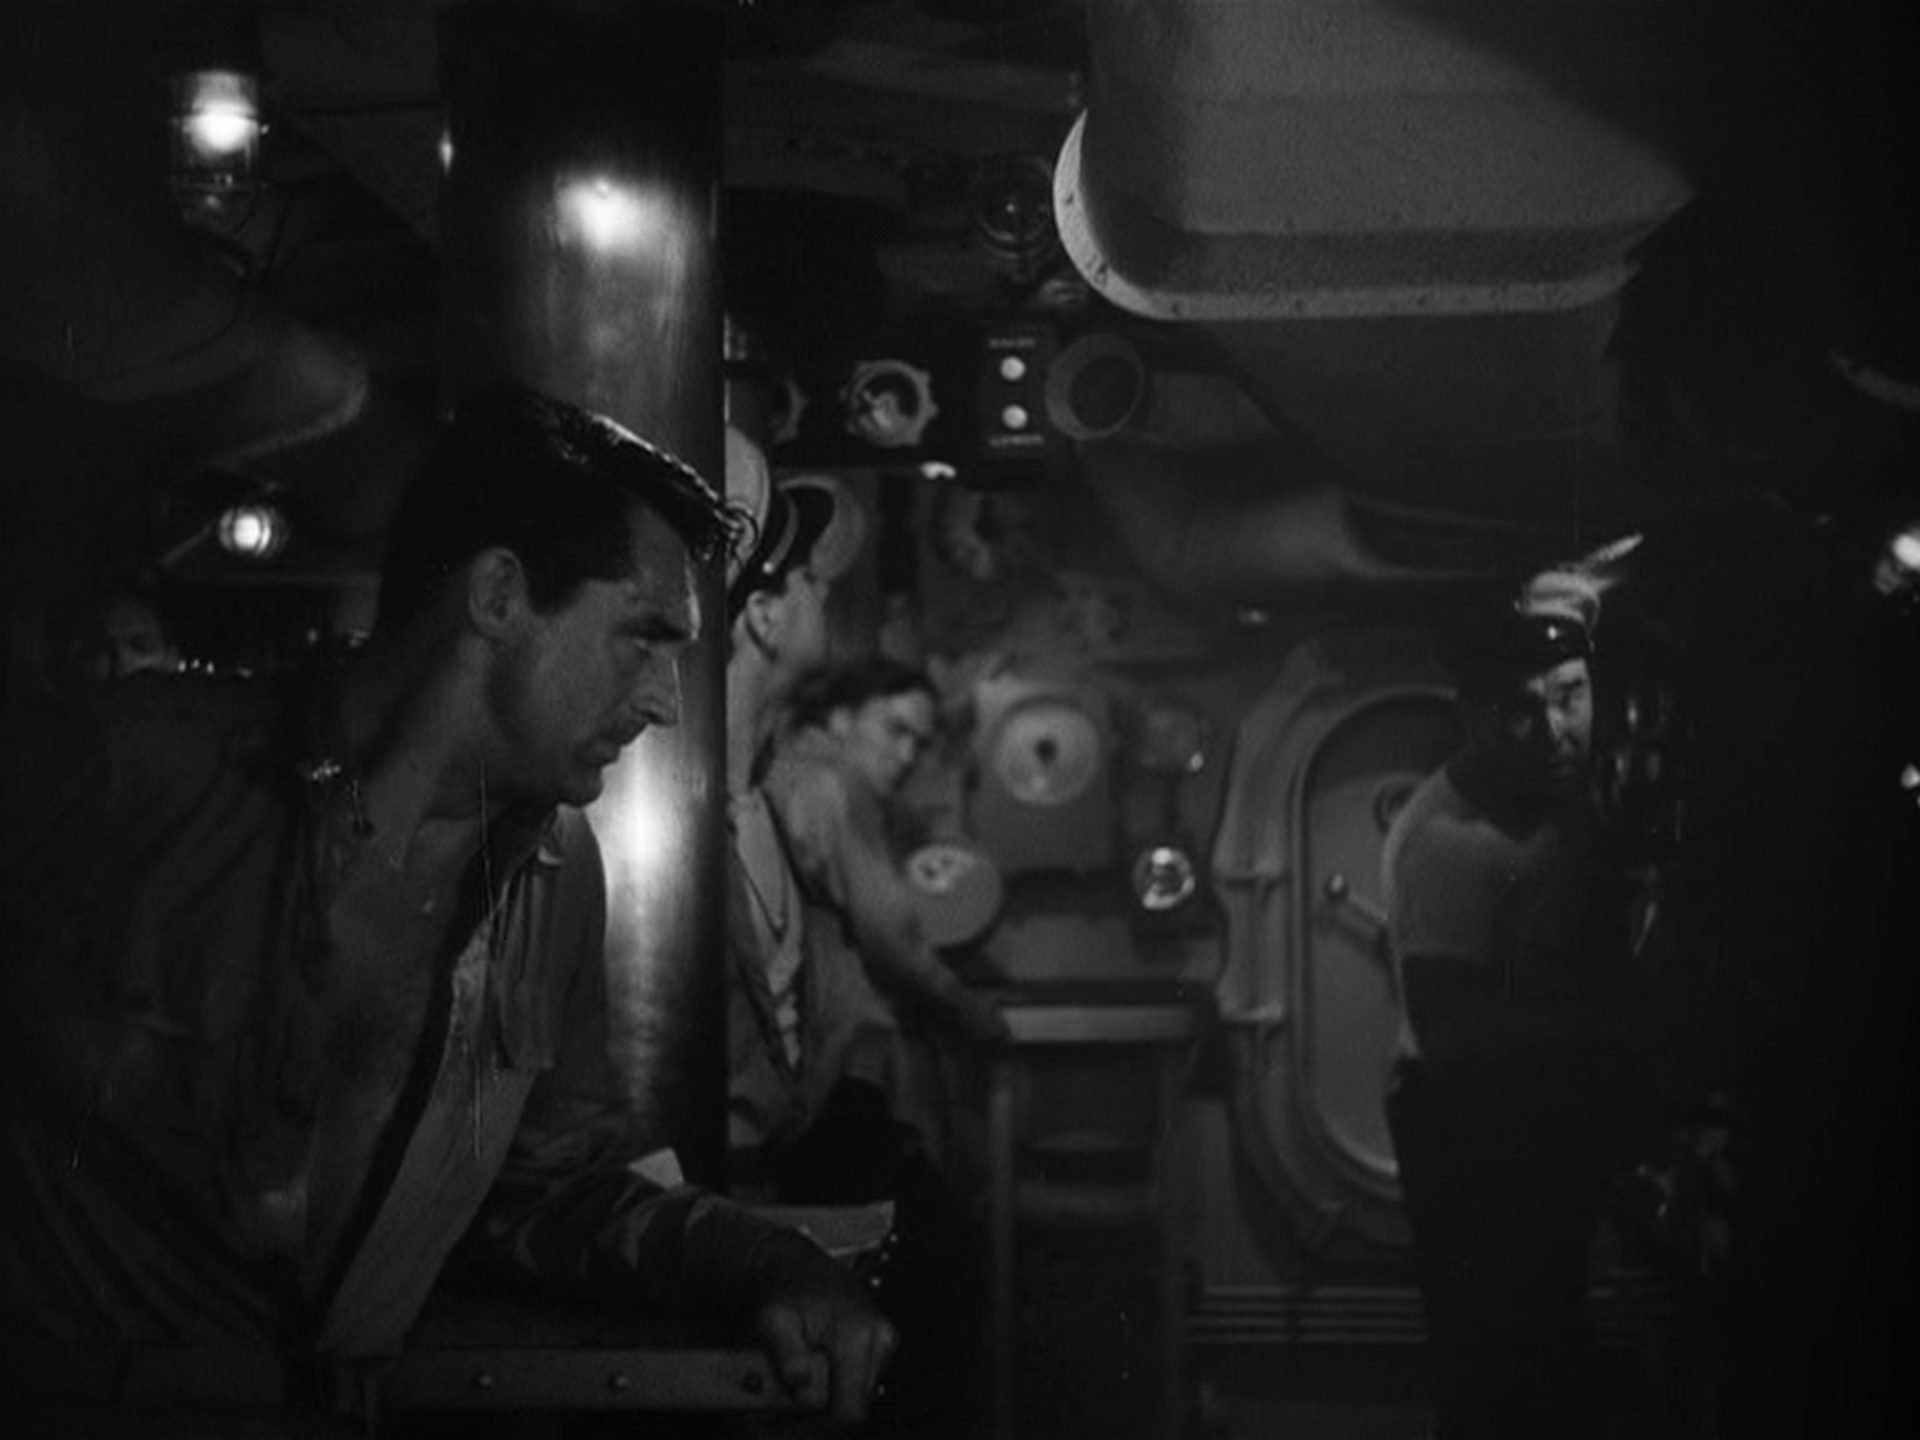 Sinister black and white scene with a young Cary Grant in the foreground with his shirt open and eyes strained inside a submarine.